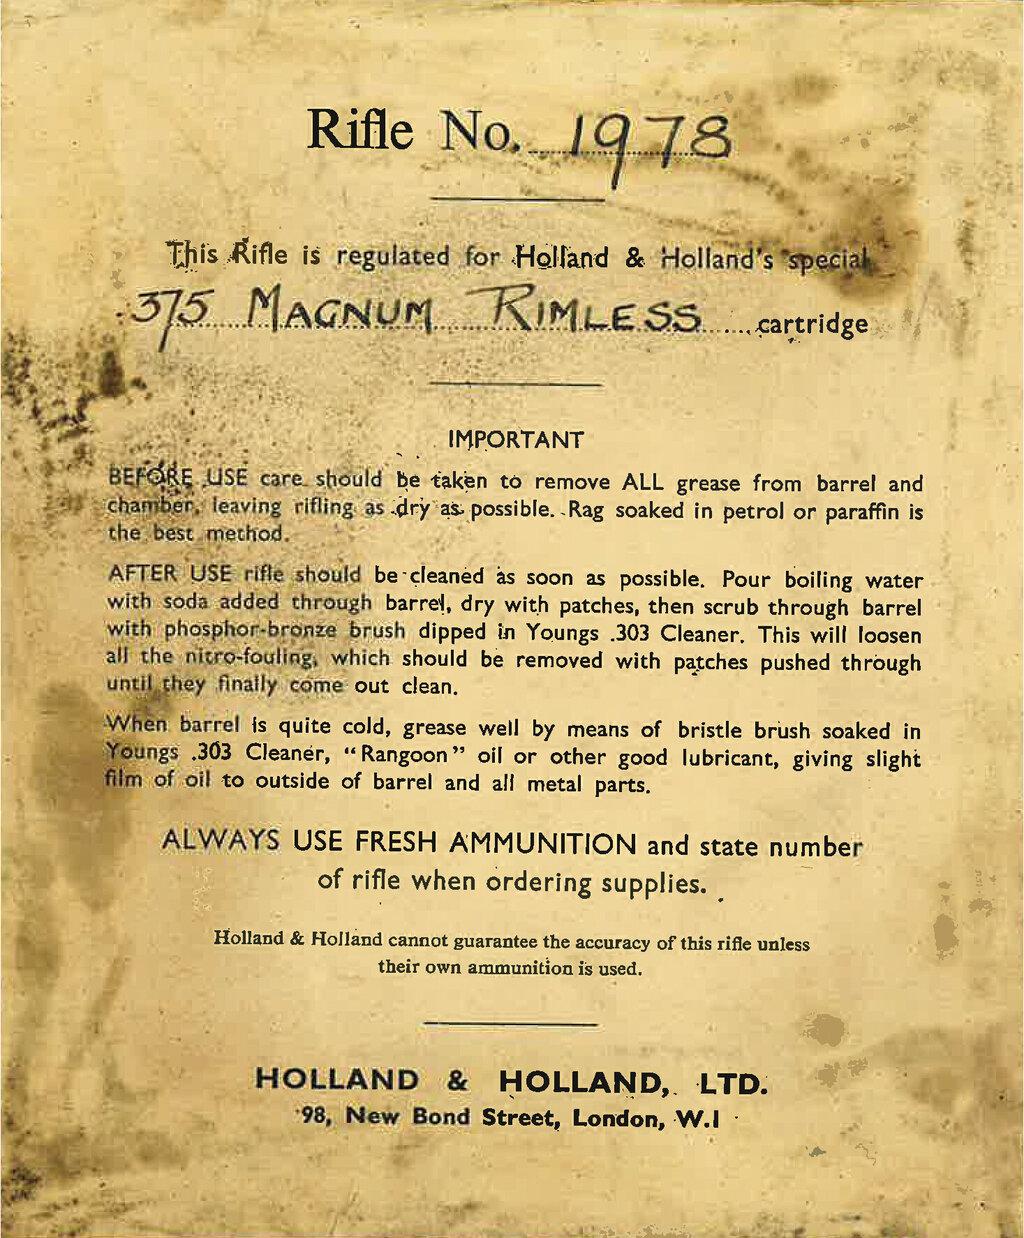 Holland & Holland Bolt Action Magazine Rifle with Zeiss Scope